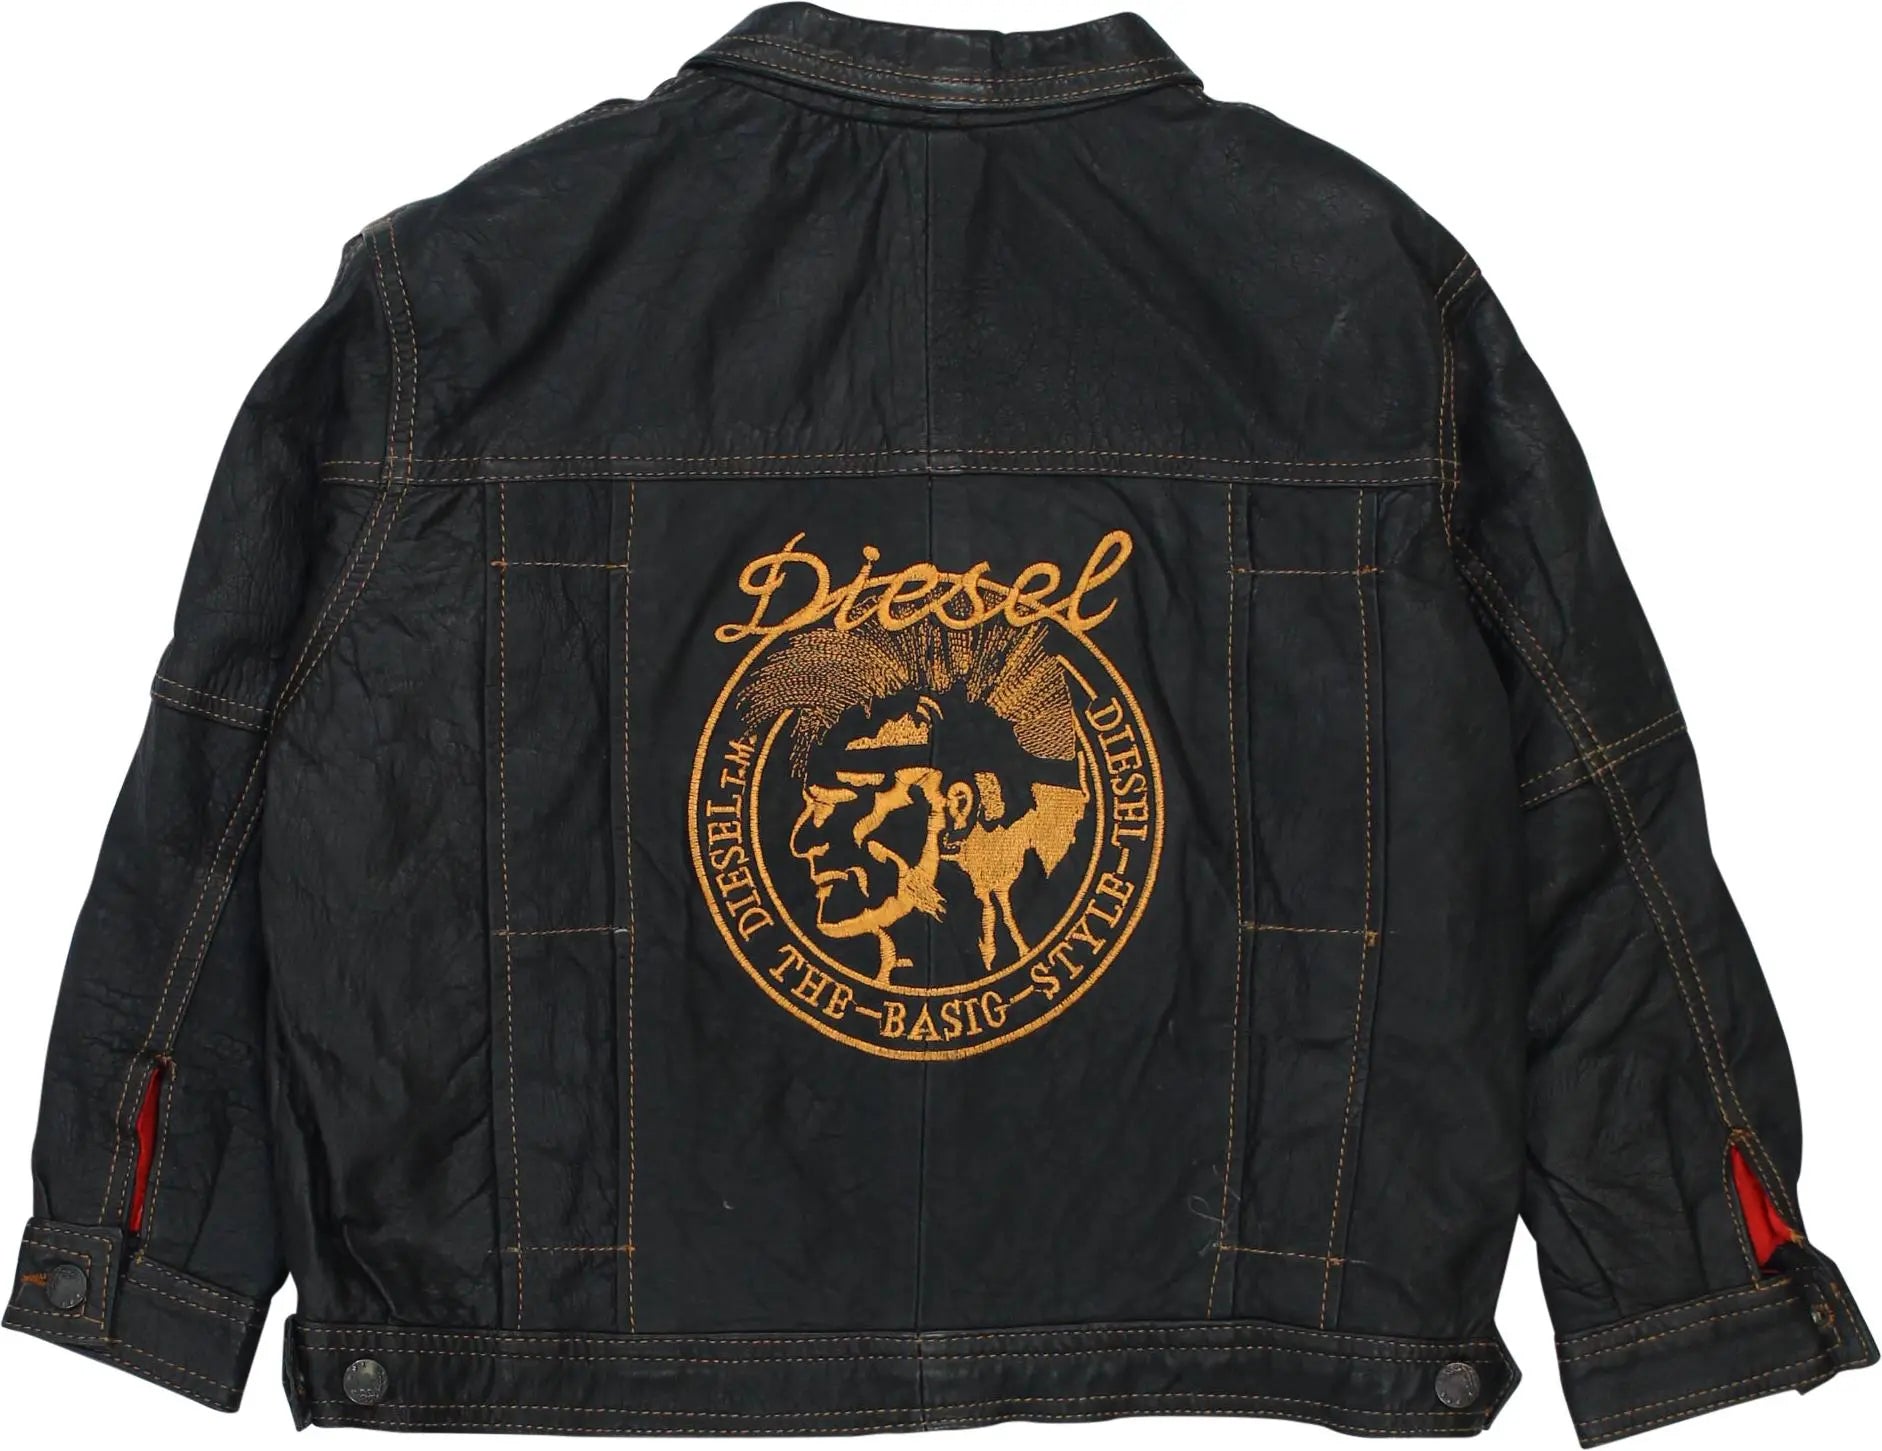 Diesel - Black Leather Jacket by Diesel- ThriftTale.com - Vintage and second handclothing